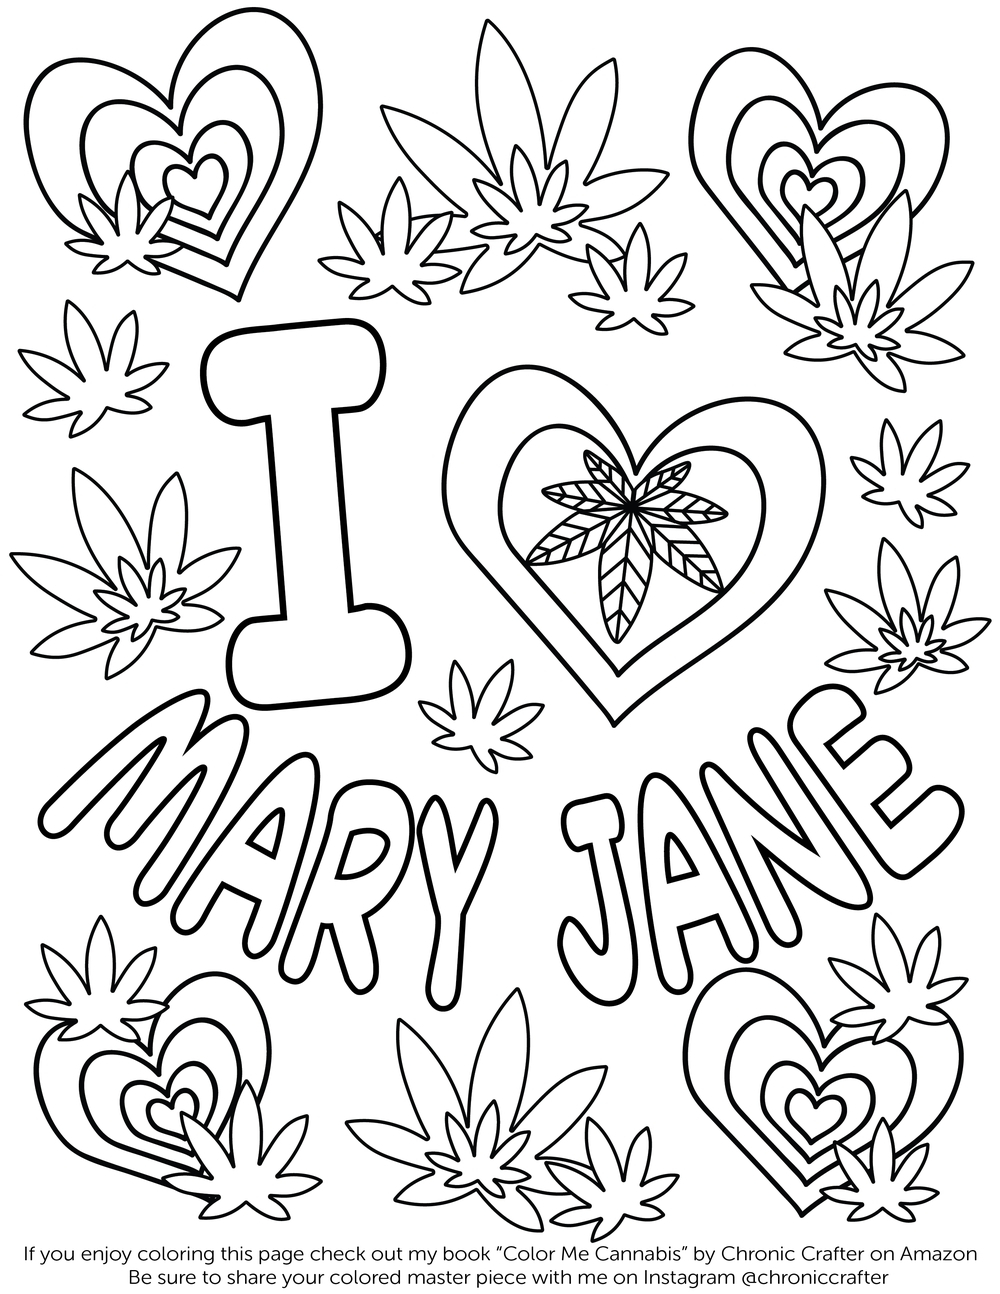 Weed Coloring Pages Coloring Page Fresh Stoner Coloring Pages Free Book  Weed Page 37 - birijus.com